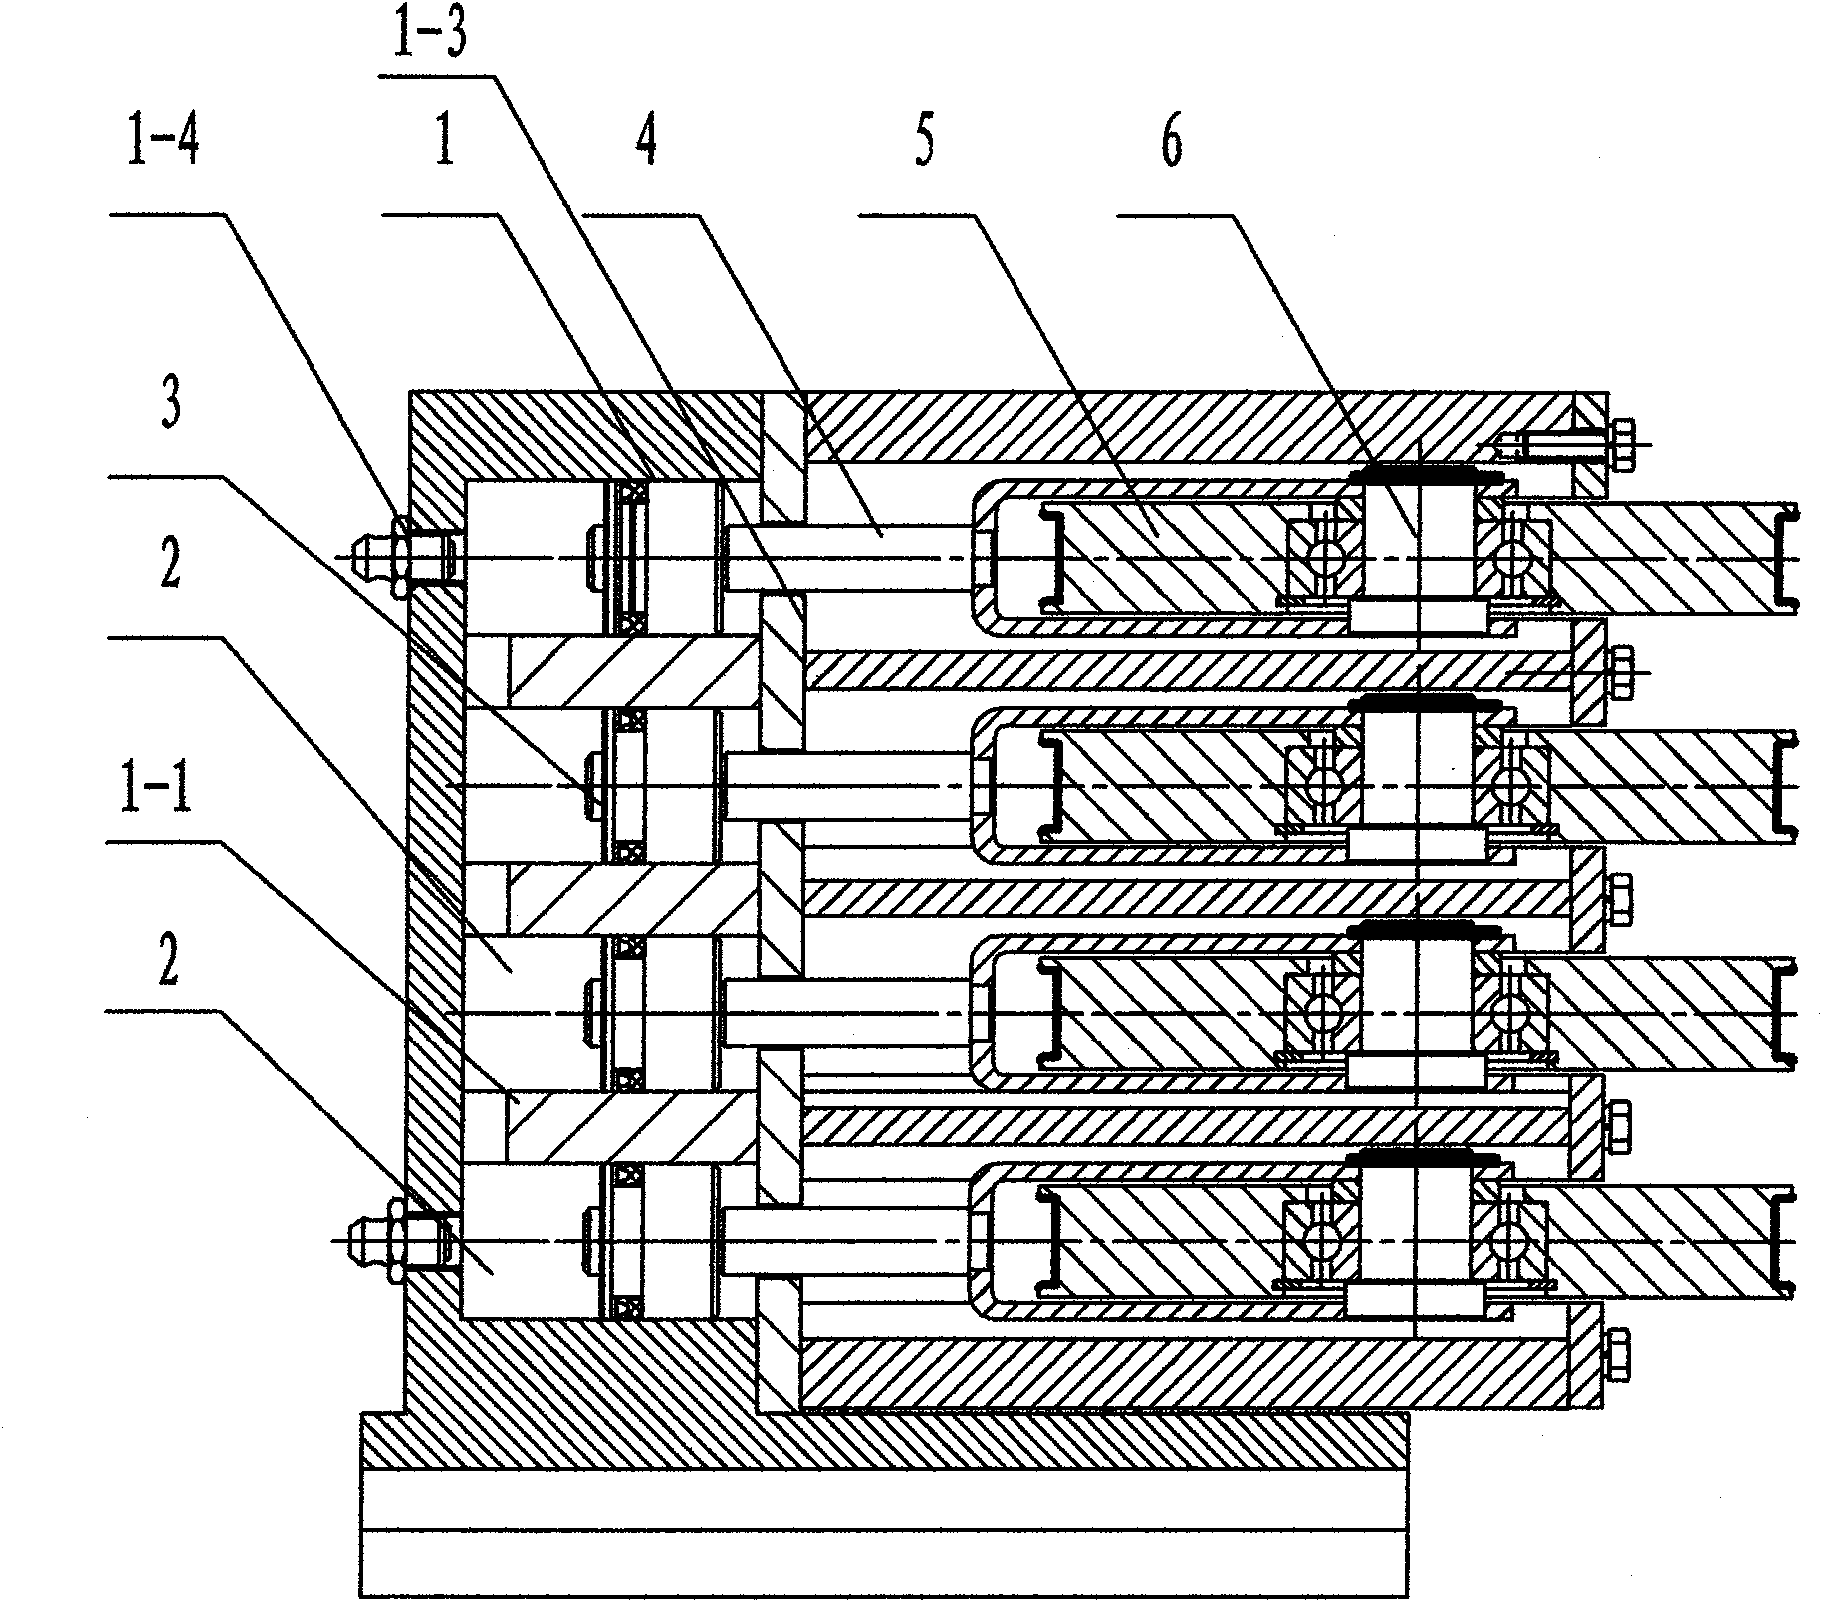 Passive hydraulic self-balancing adjusting and controlling device